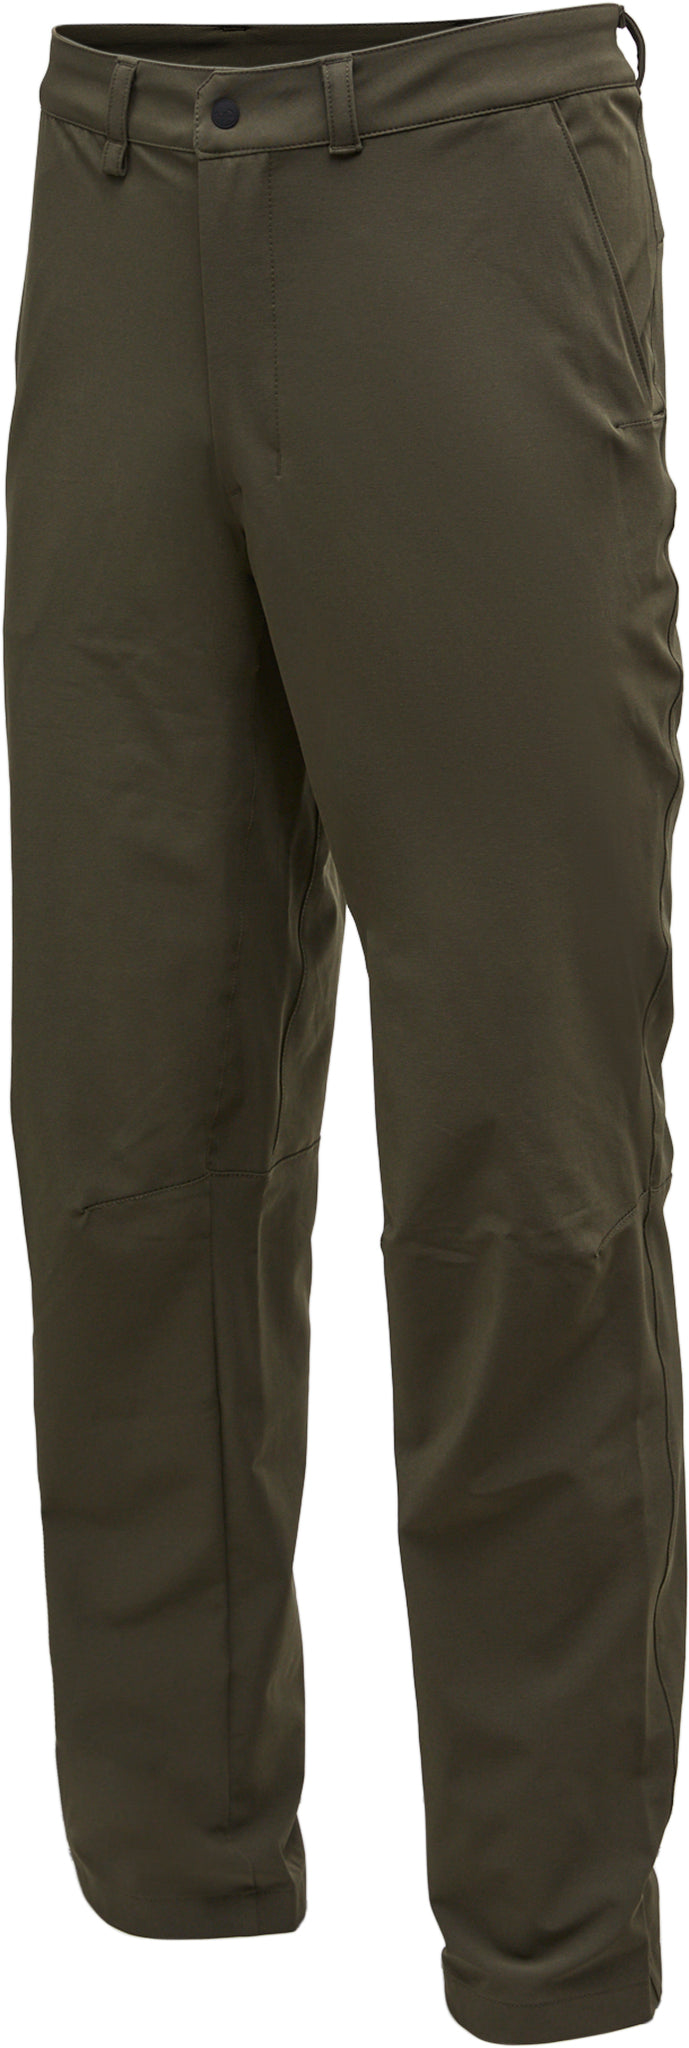 The North Face Paramount Pant - Men's | Altitude Sports